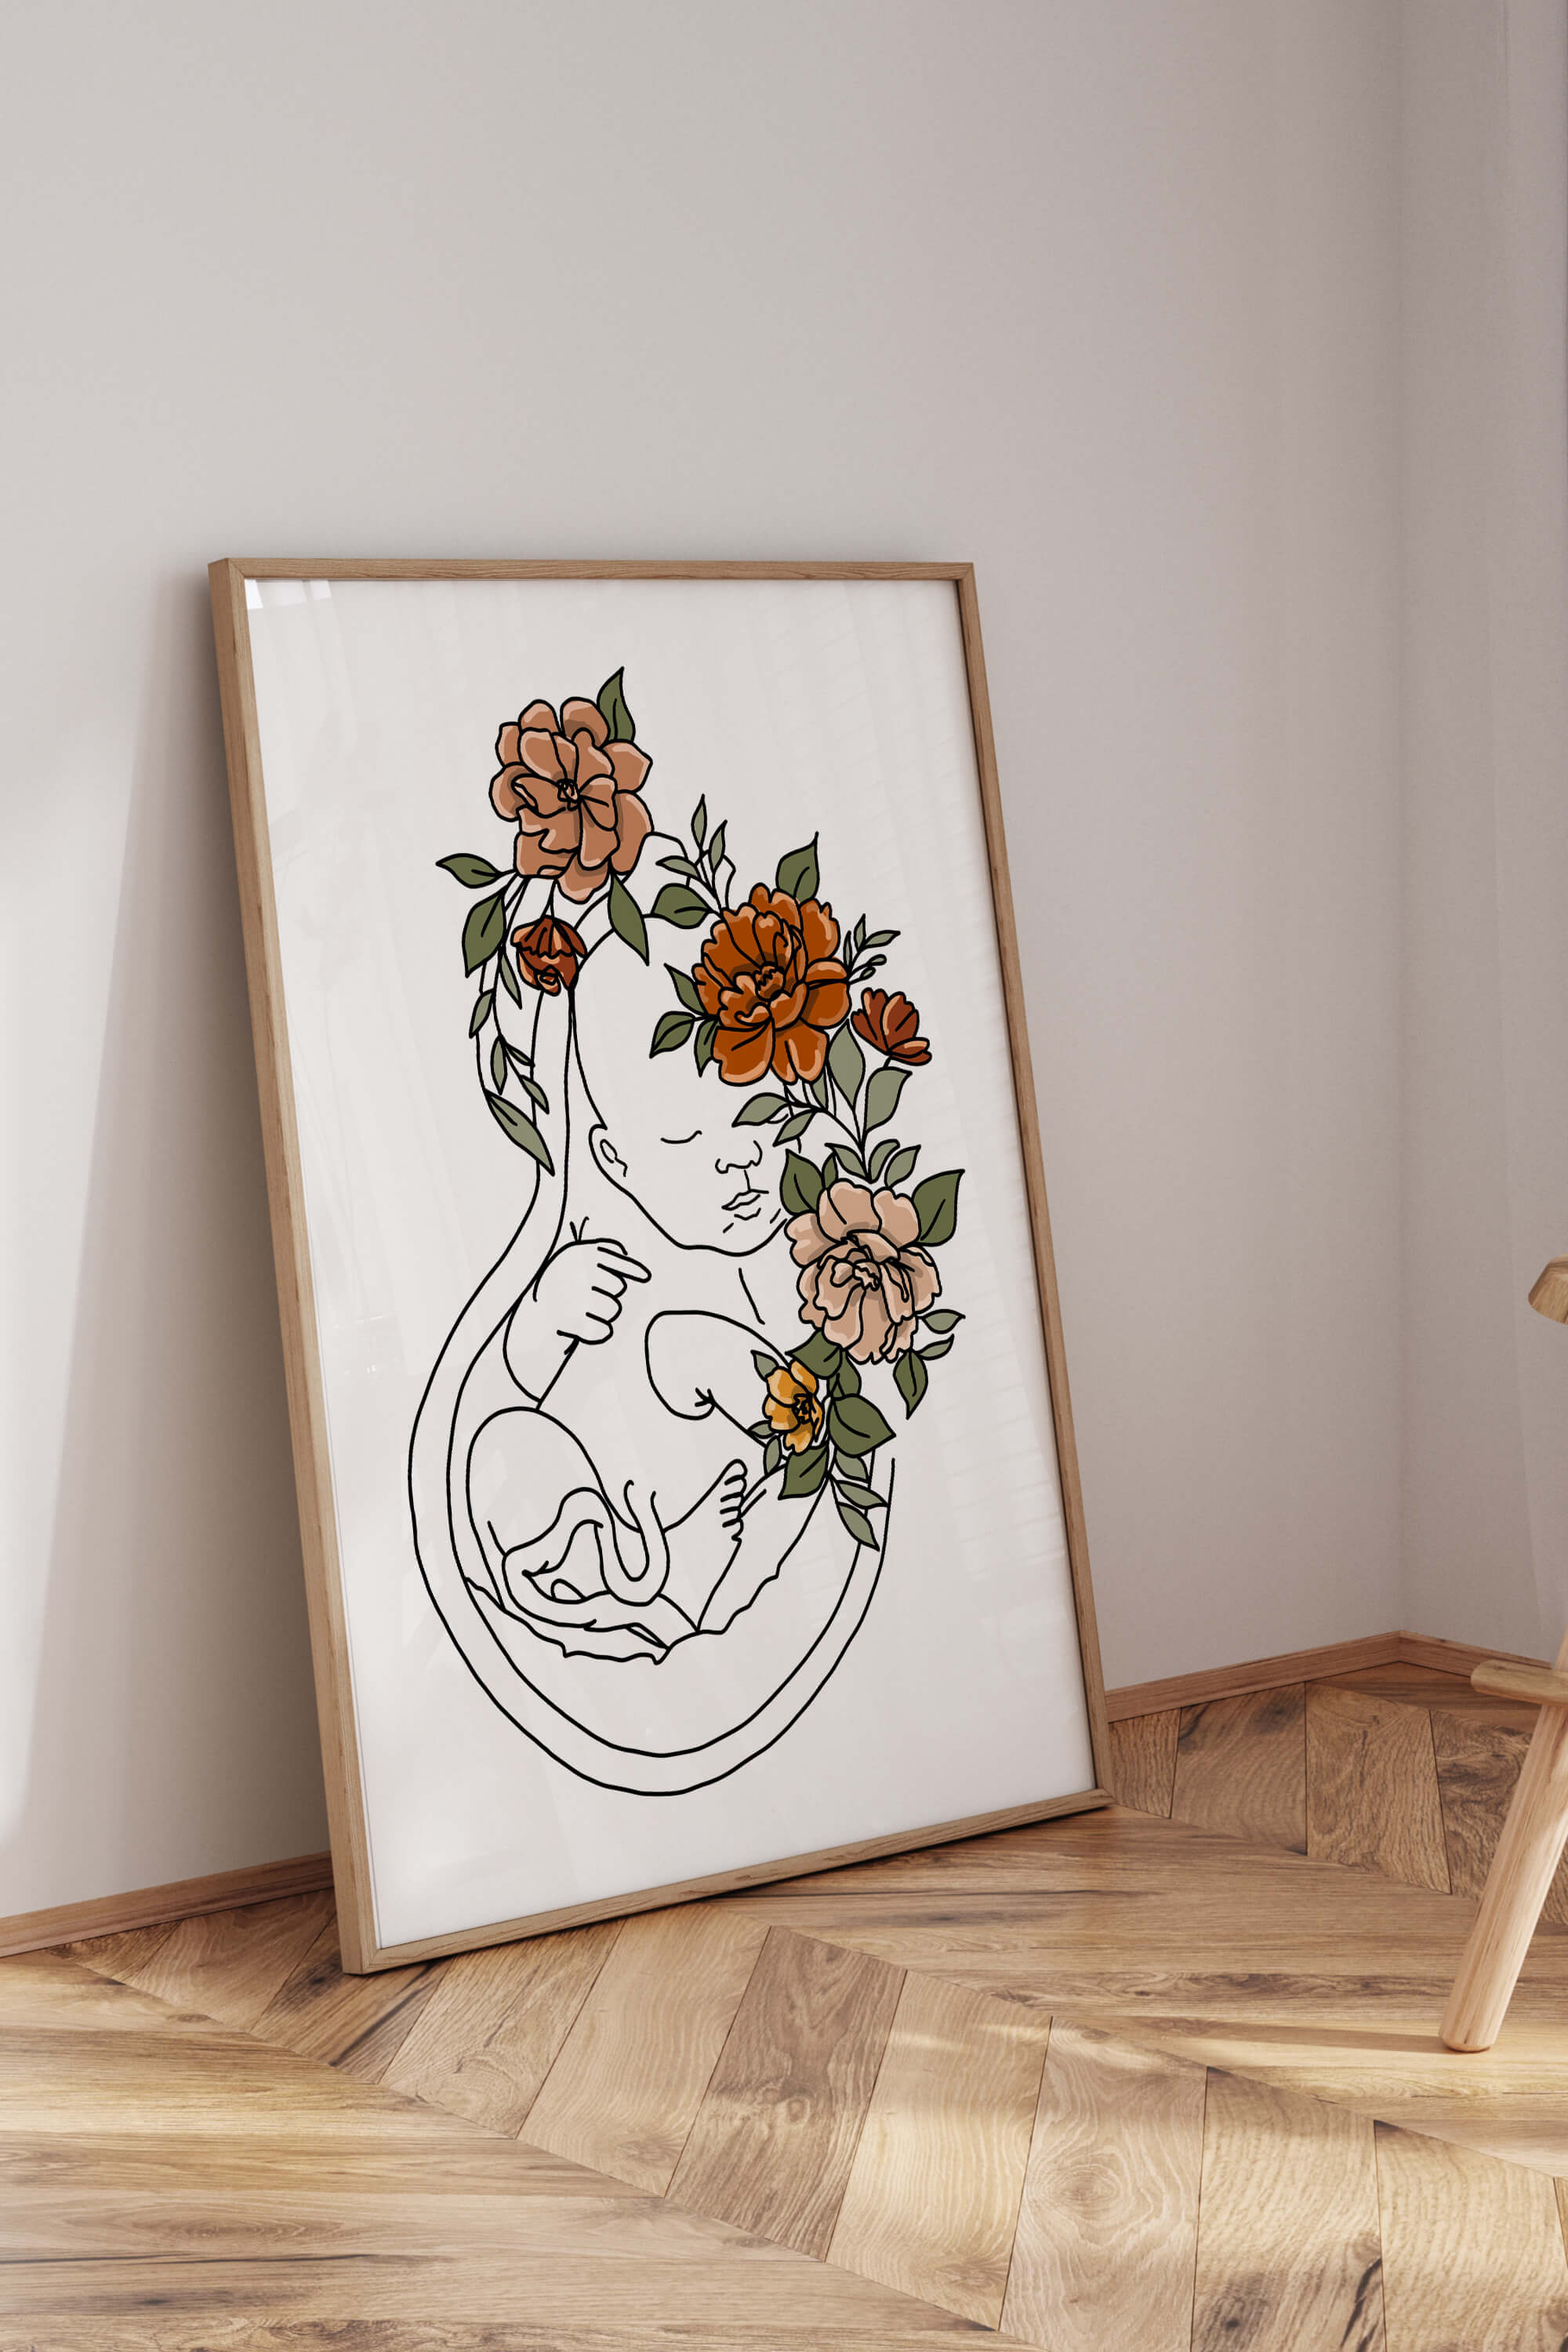 Doula Gifts - Aesthetic and Colorful Uterus Artwork celebrating women's health and childbirth.